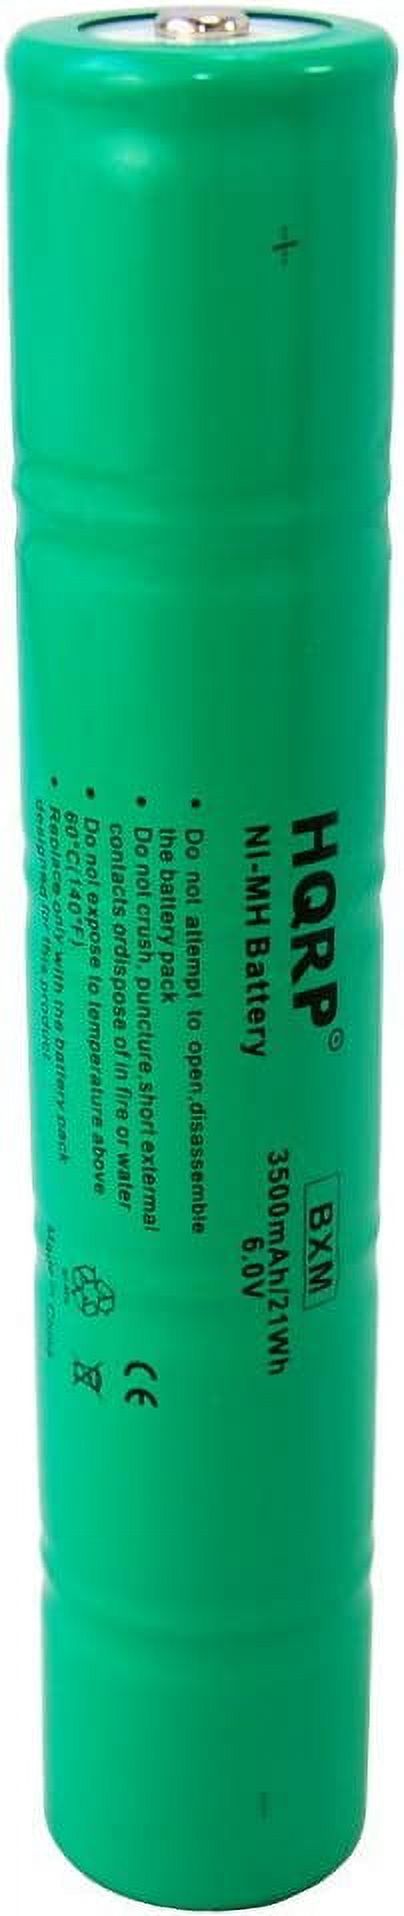 HQRP Ultra High Capacity Ni-Mh 1/2D Battery for Moltech Power Systems N38AF001A / Intec IMT-3500D / ESR8EE5920 - image 3 of 6